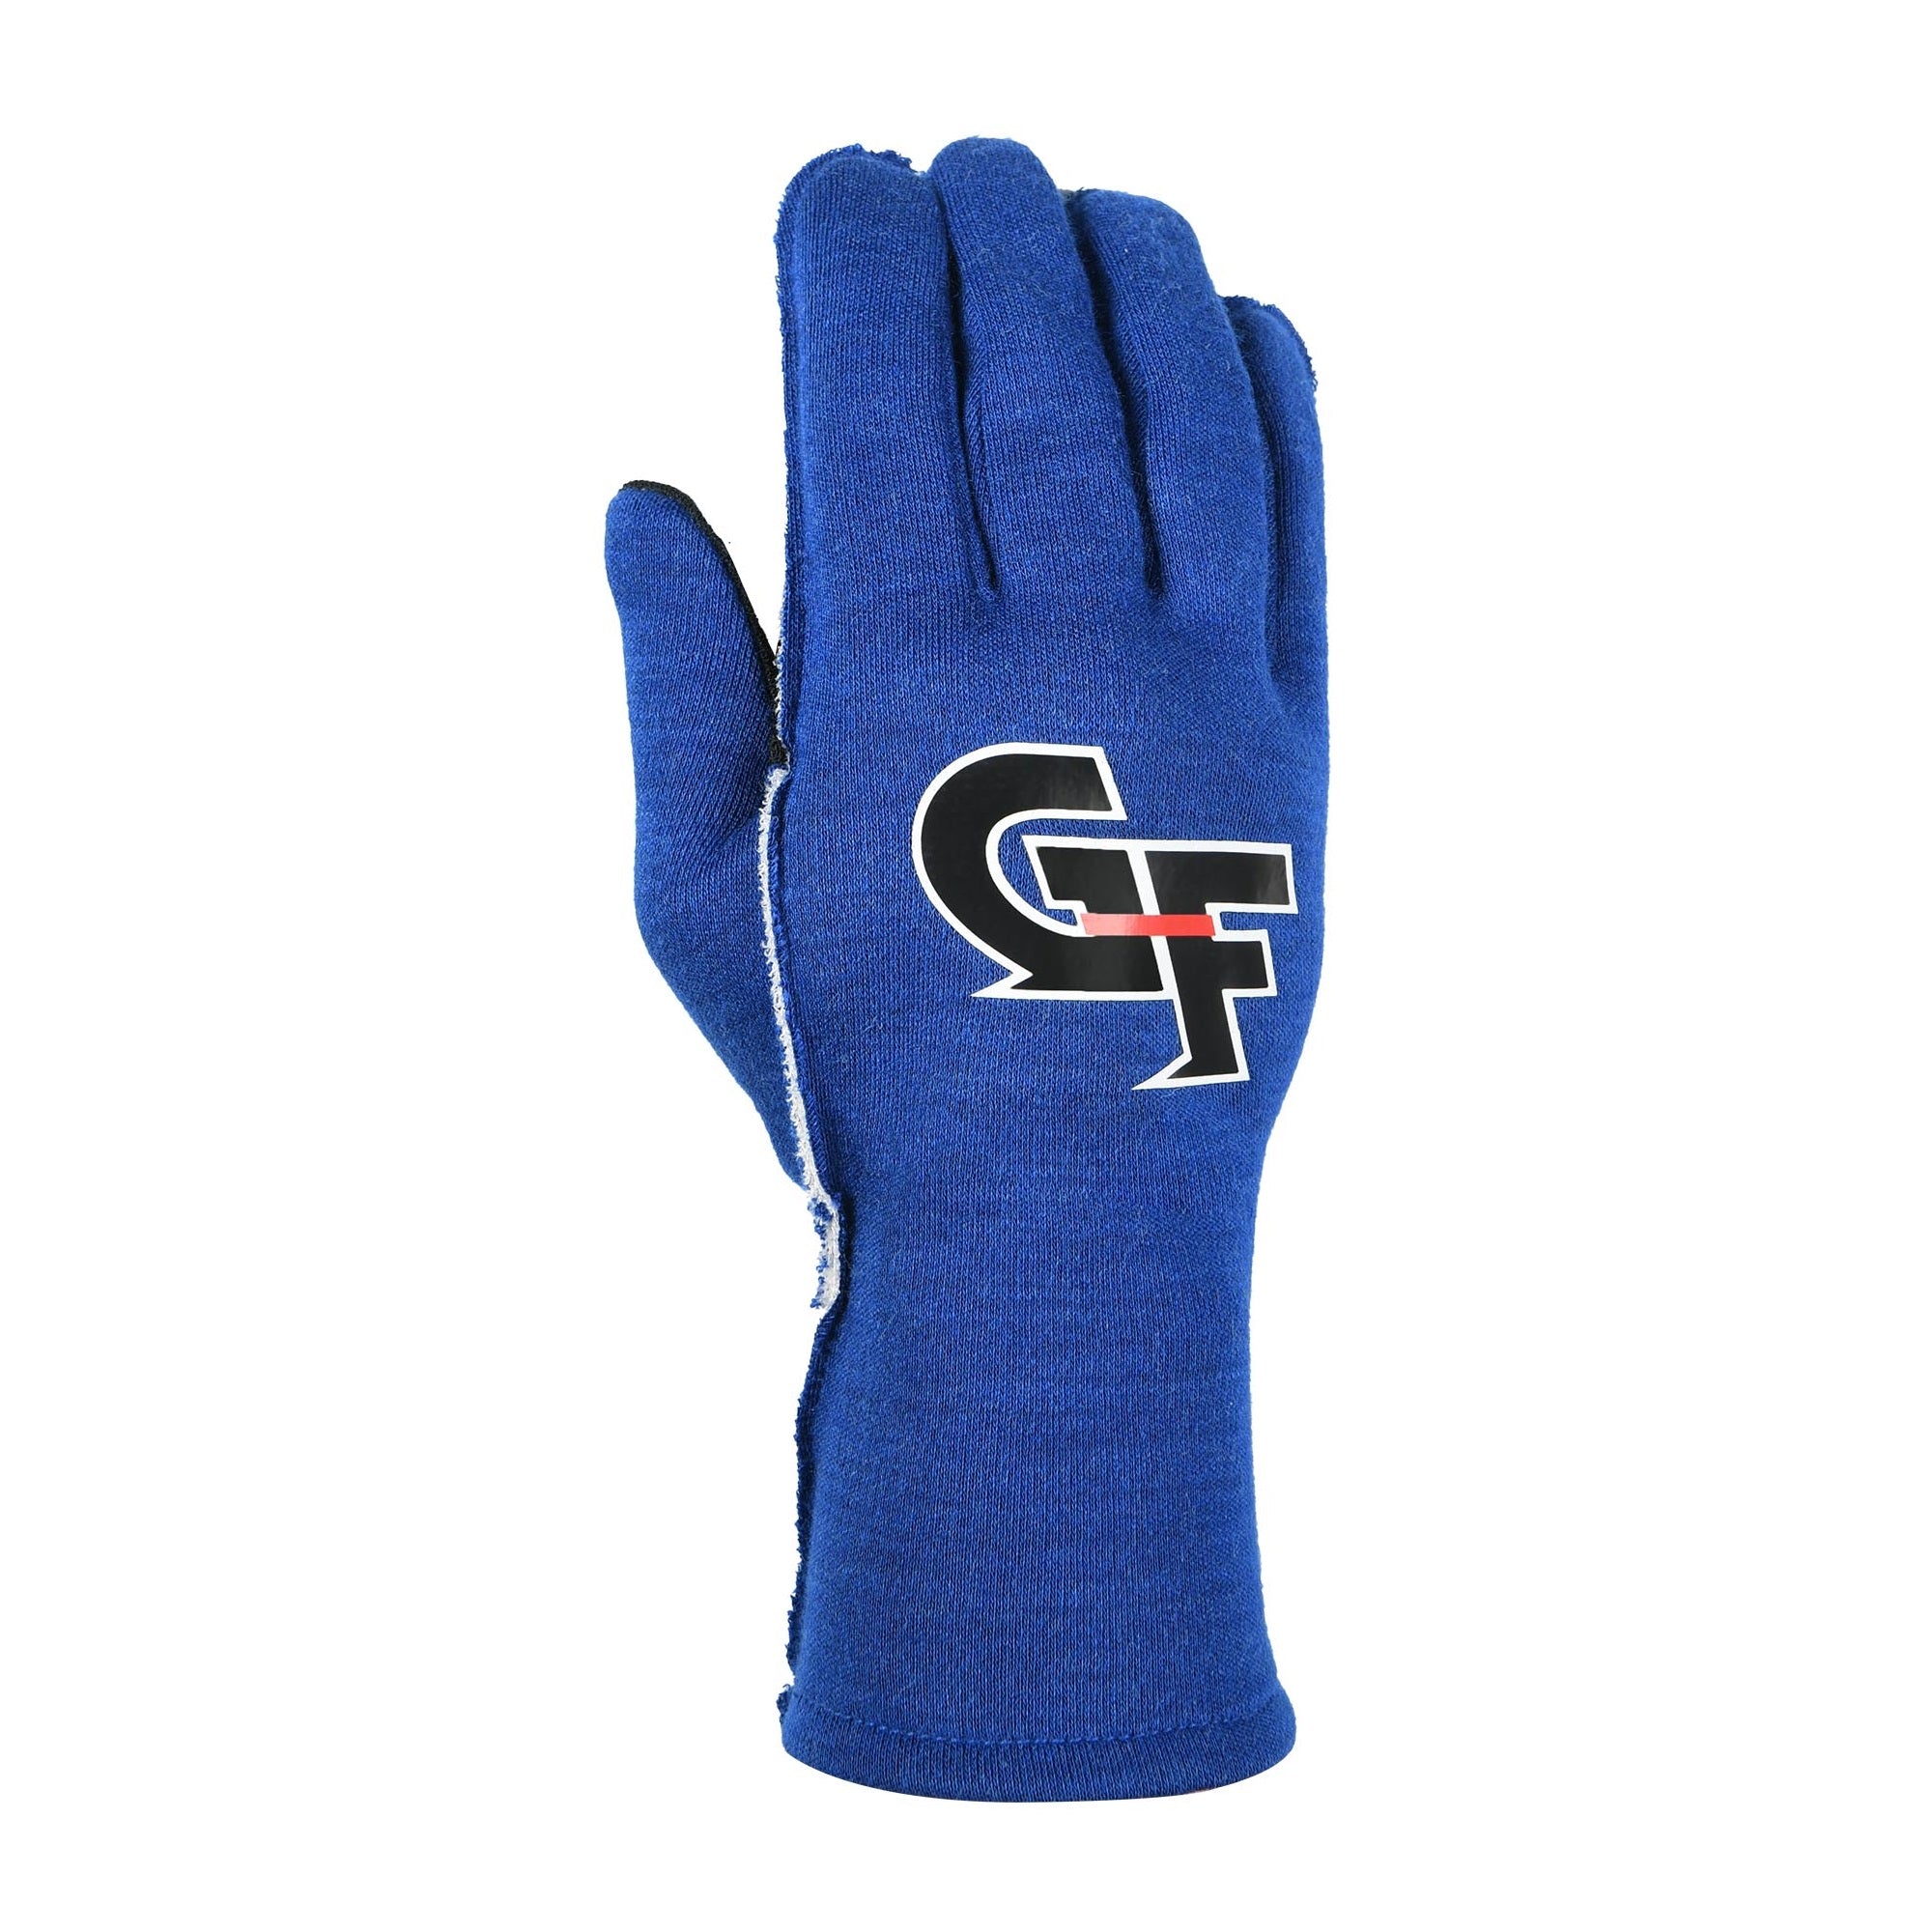 G-Limit RS Gloves